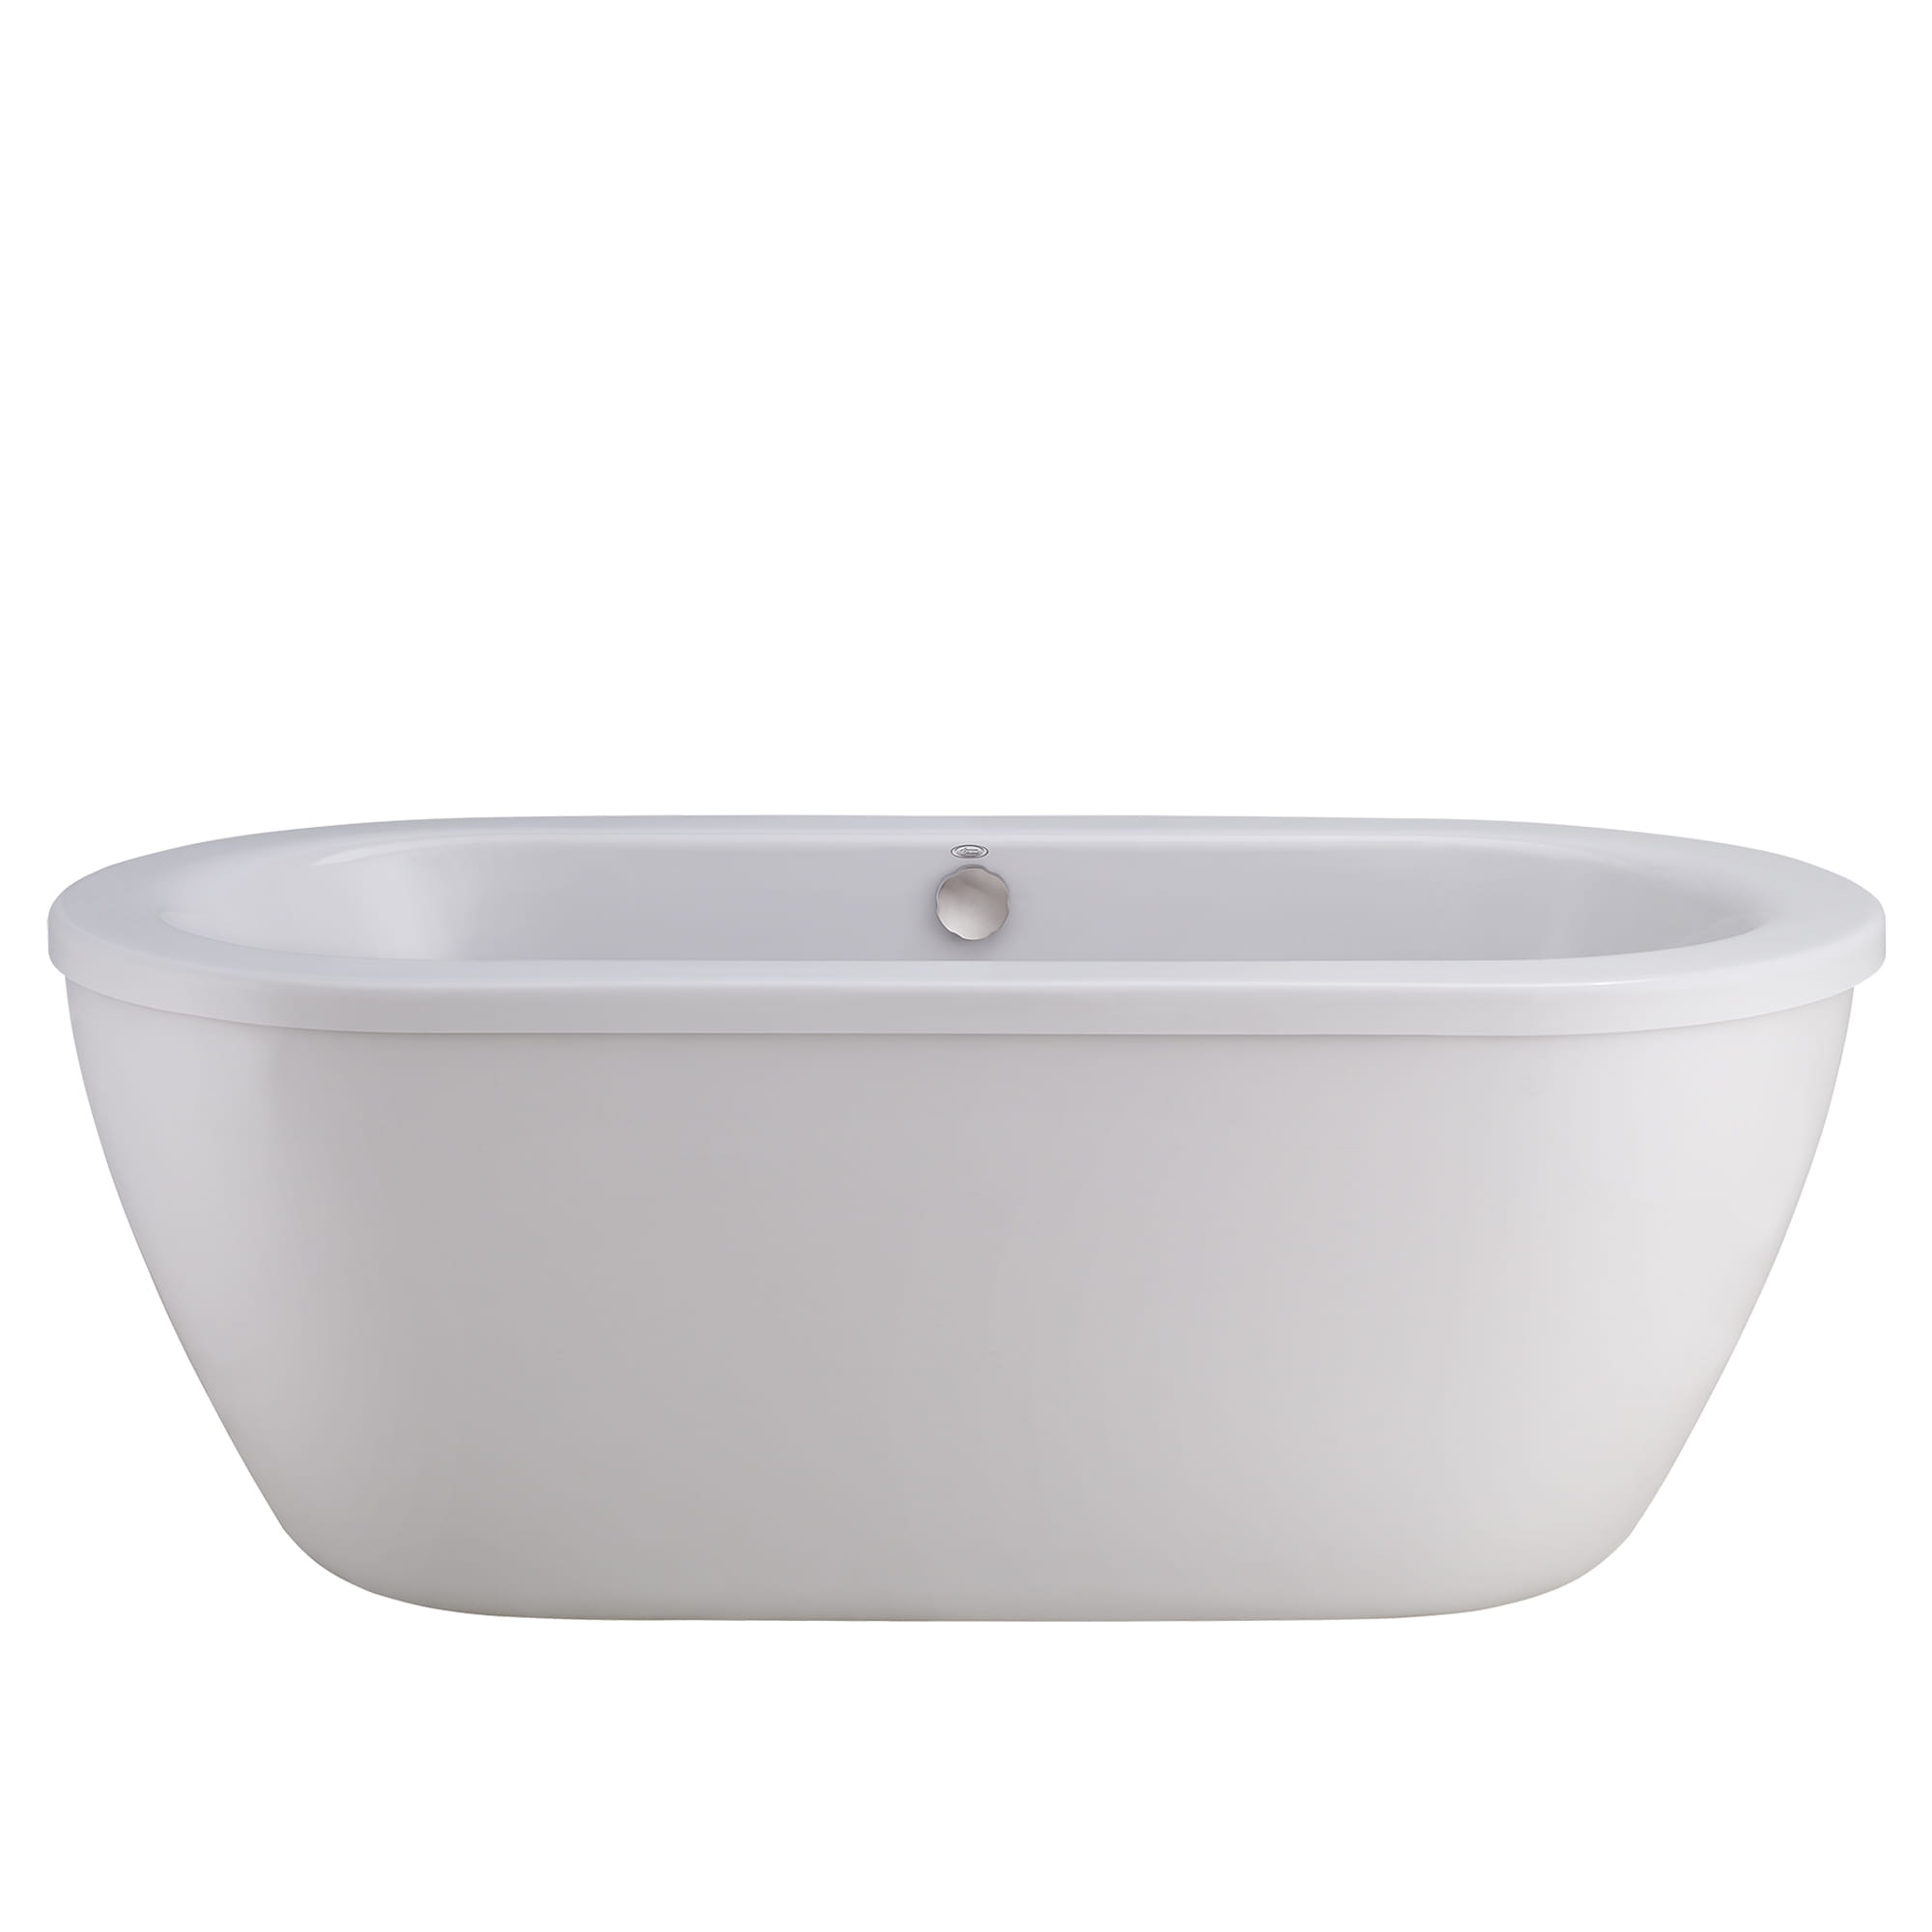 Cadet 66 x 32 Inch Freestanding Bathtub With Polished Chrome Finish Filler and Drain Kit ARCTIC